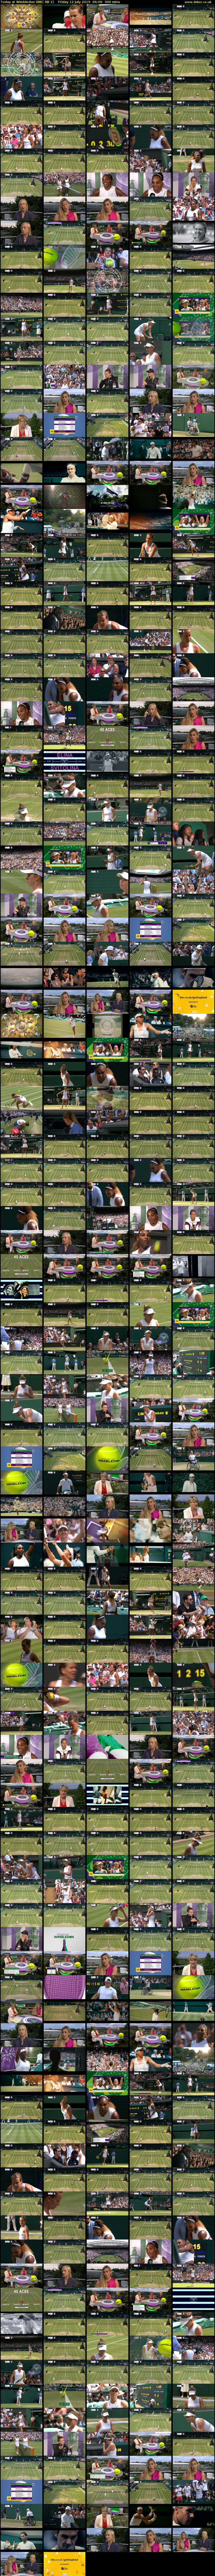 Today at Wimbledon (BBC RB 1) Friday 12 July 2019 06:00 - 11:00